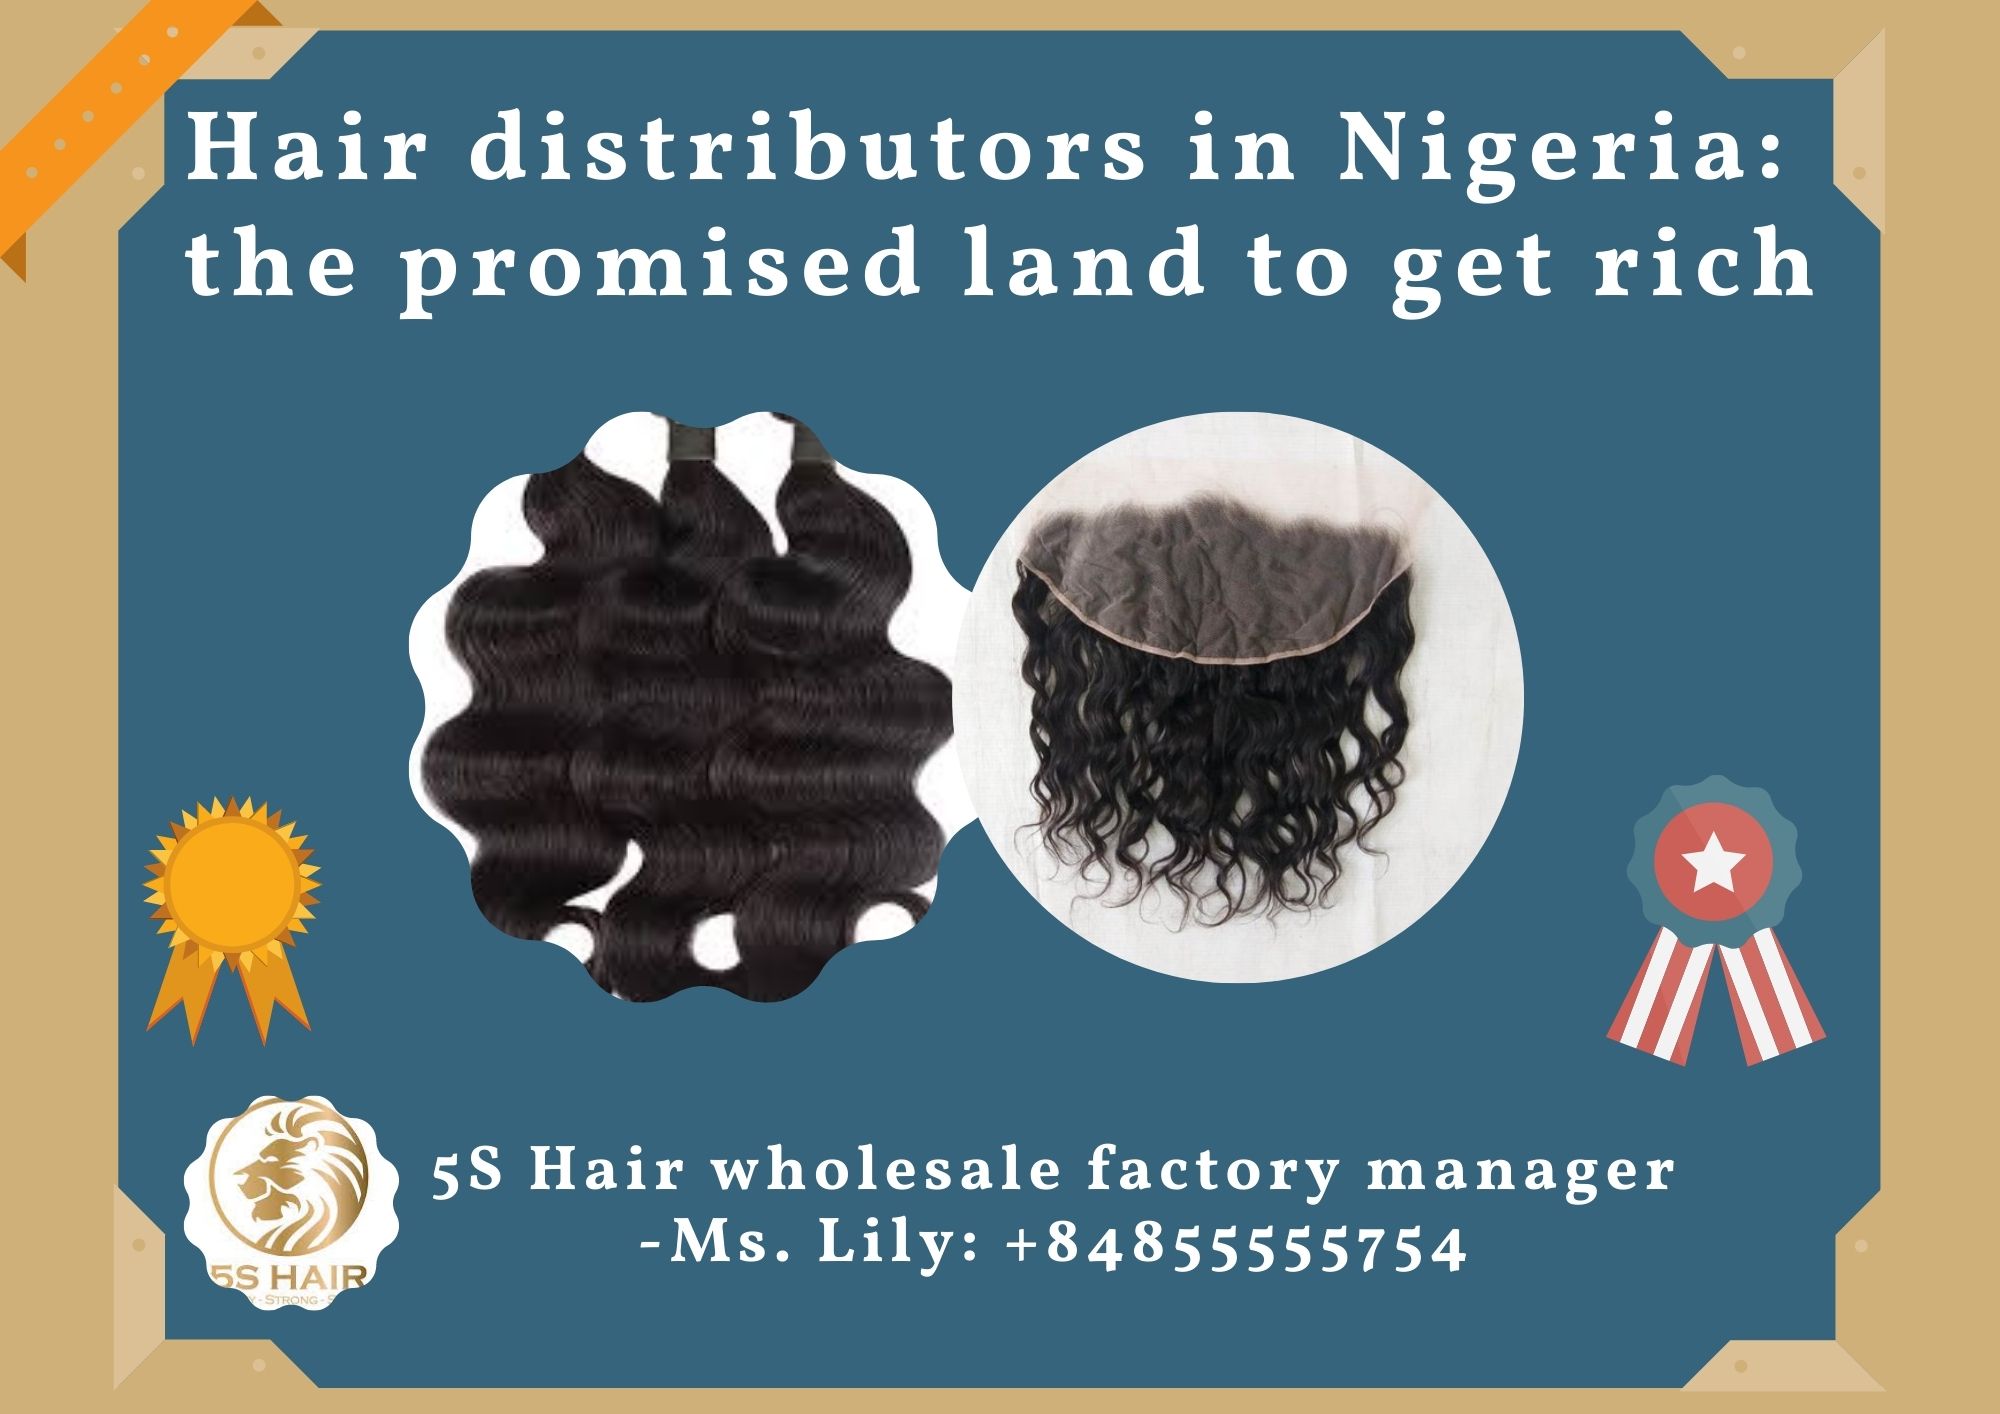 hair-distributors-in-nigeria-the-golden-country-to-get-wealthy-1